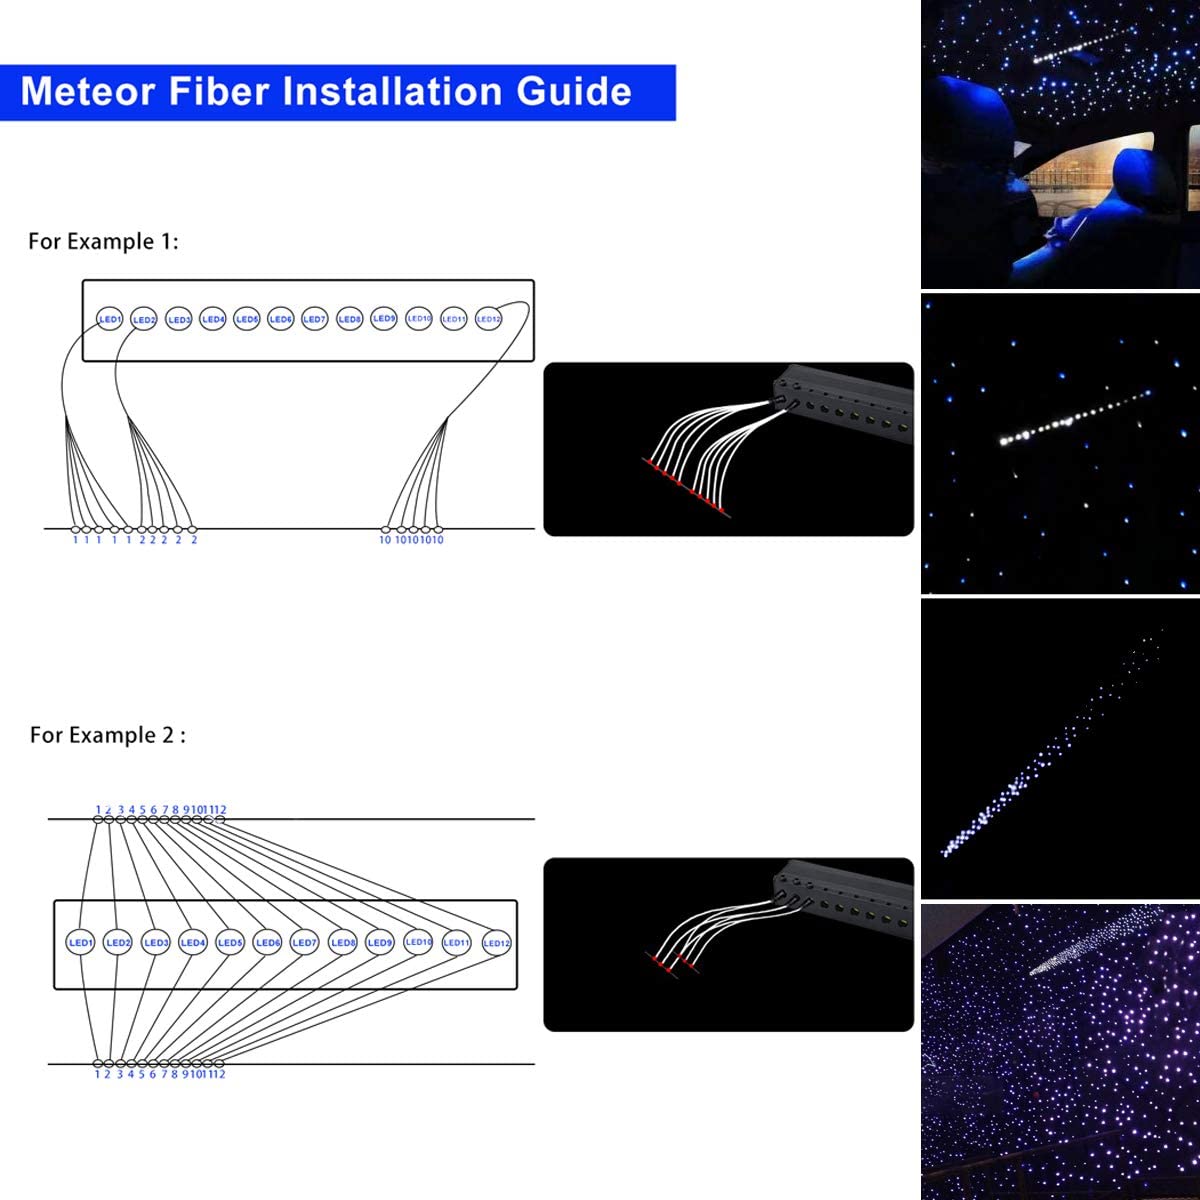 Fiber Optic Starlight Headliner Kit with Shooting Star for Car Truck SUV & Home Theater Rooms